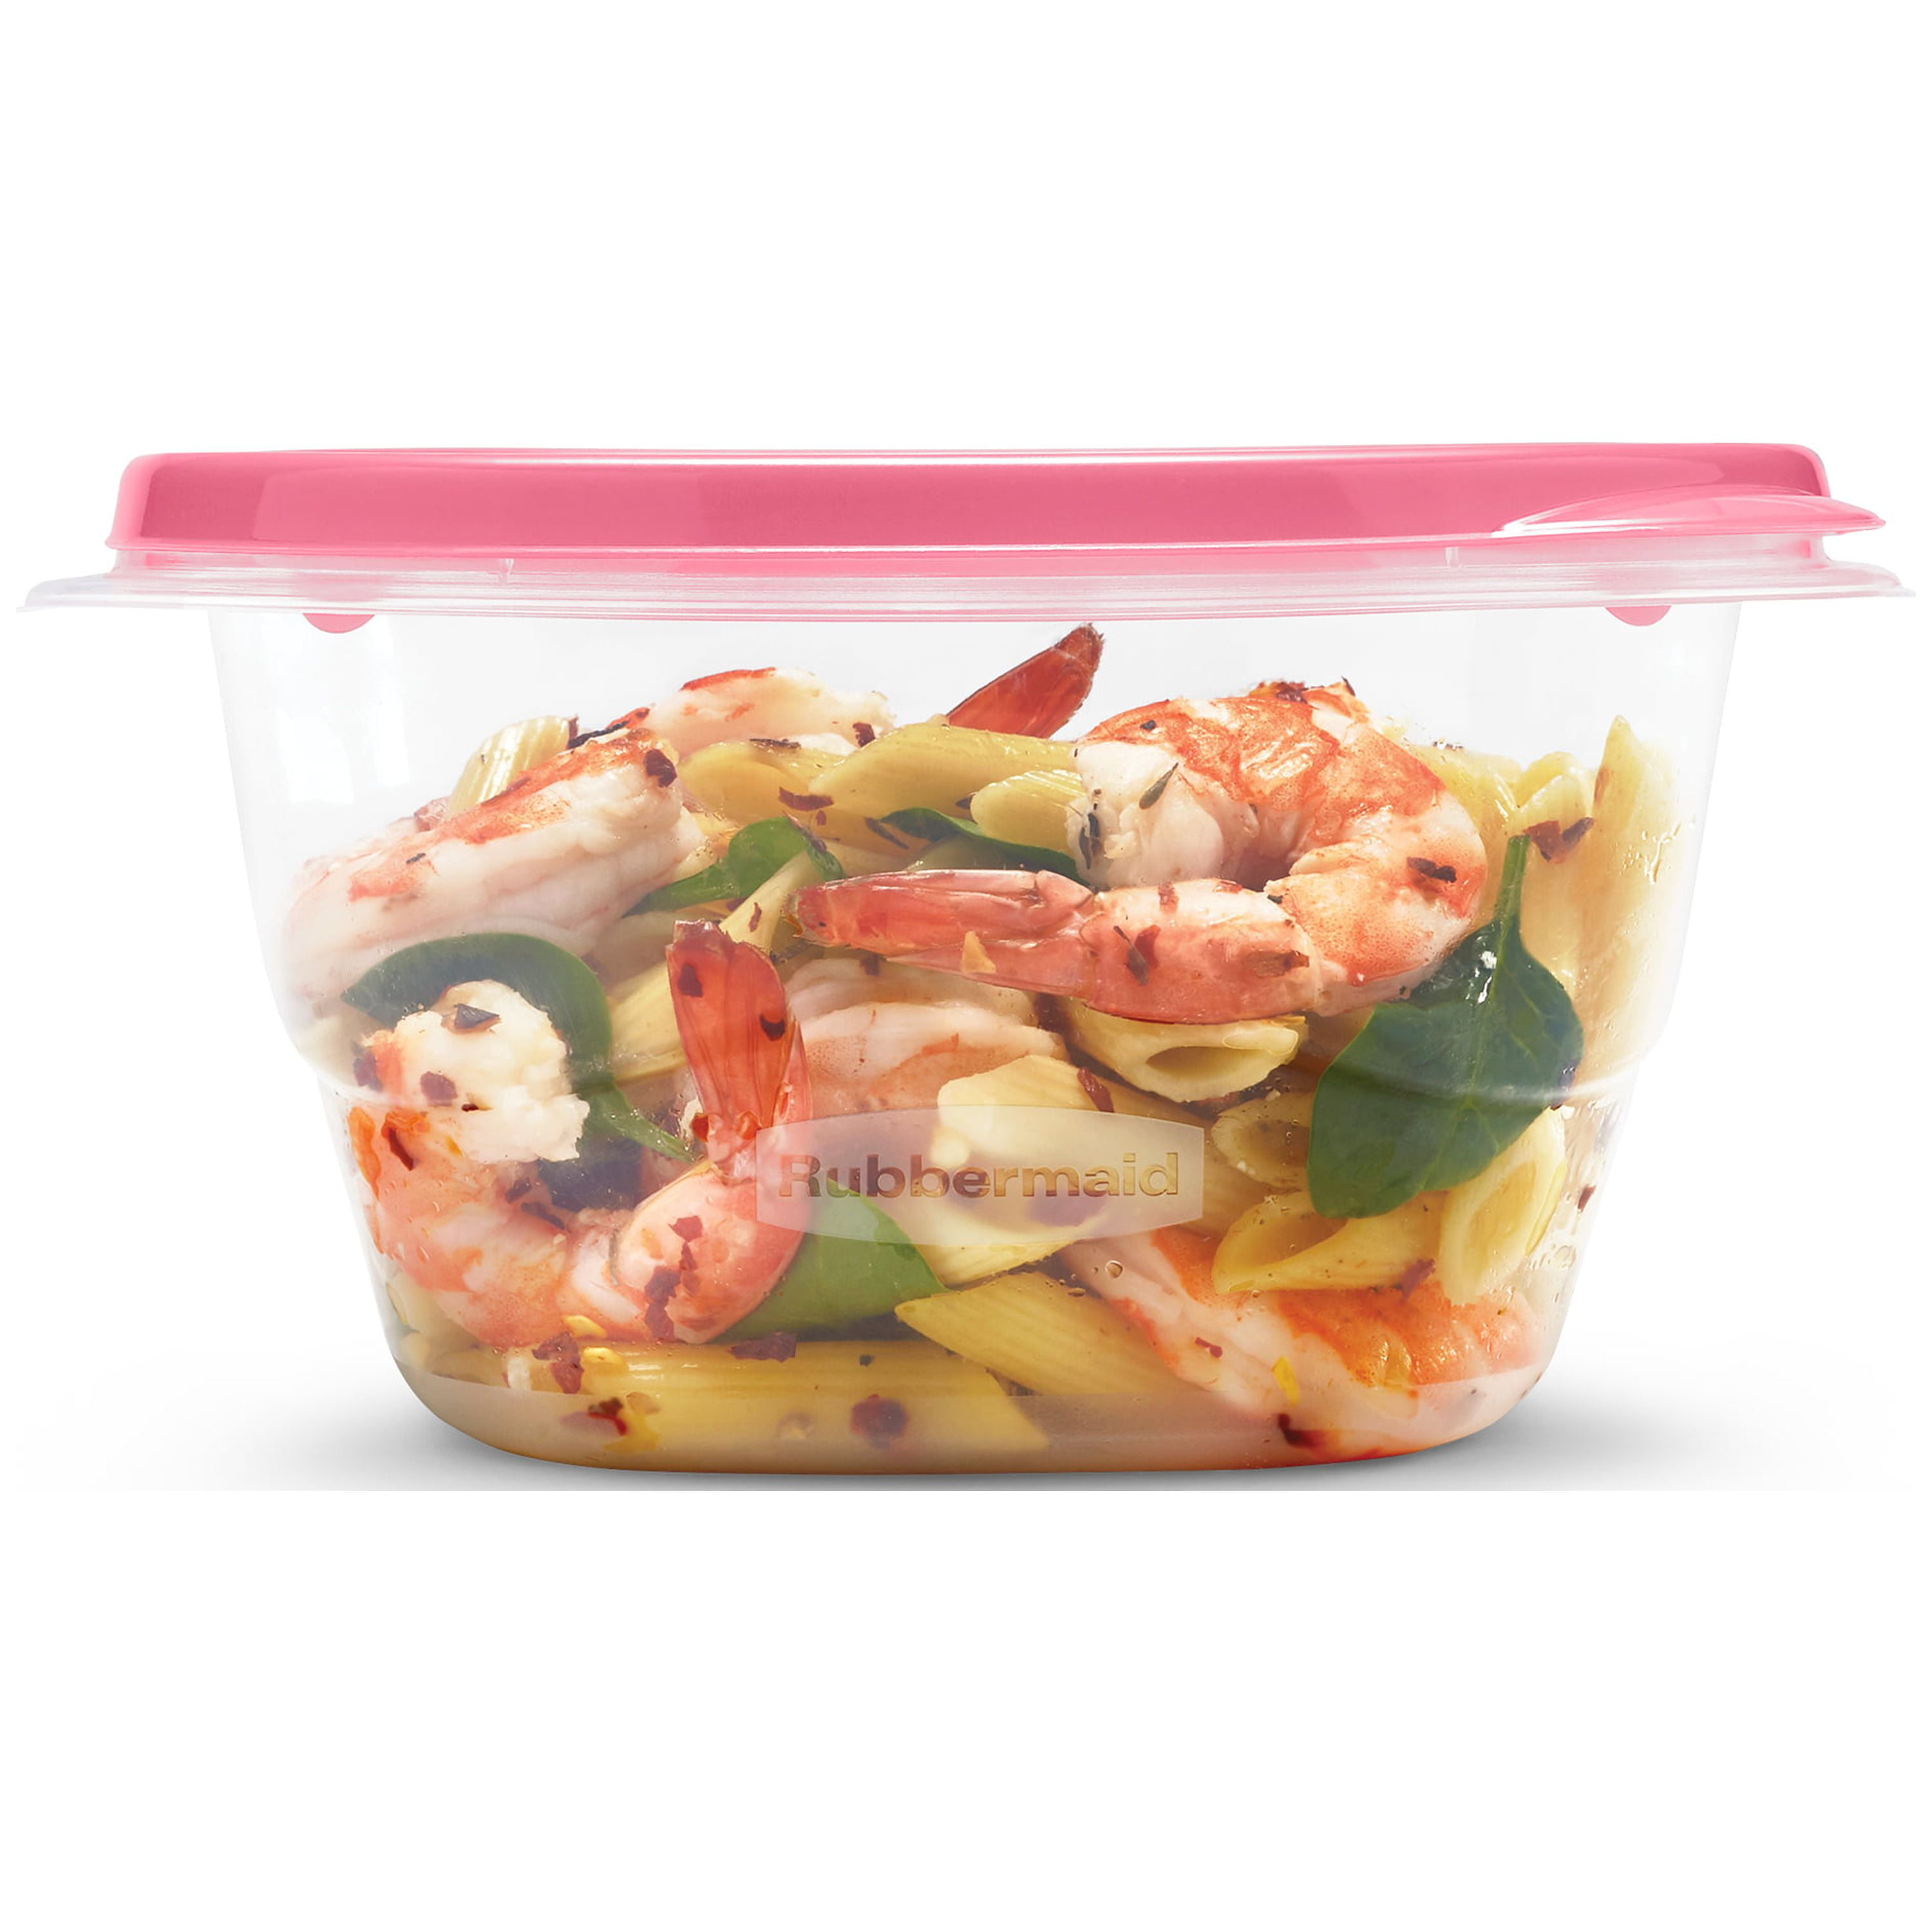 Rubbermaid TakeAlongs Food Storage Containers, Set of 8 (16 Pieces